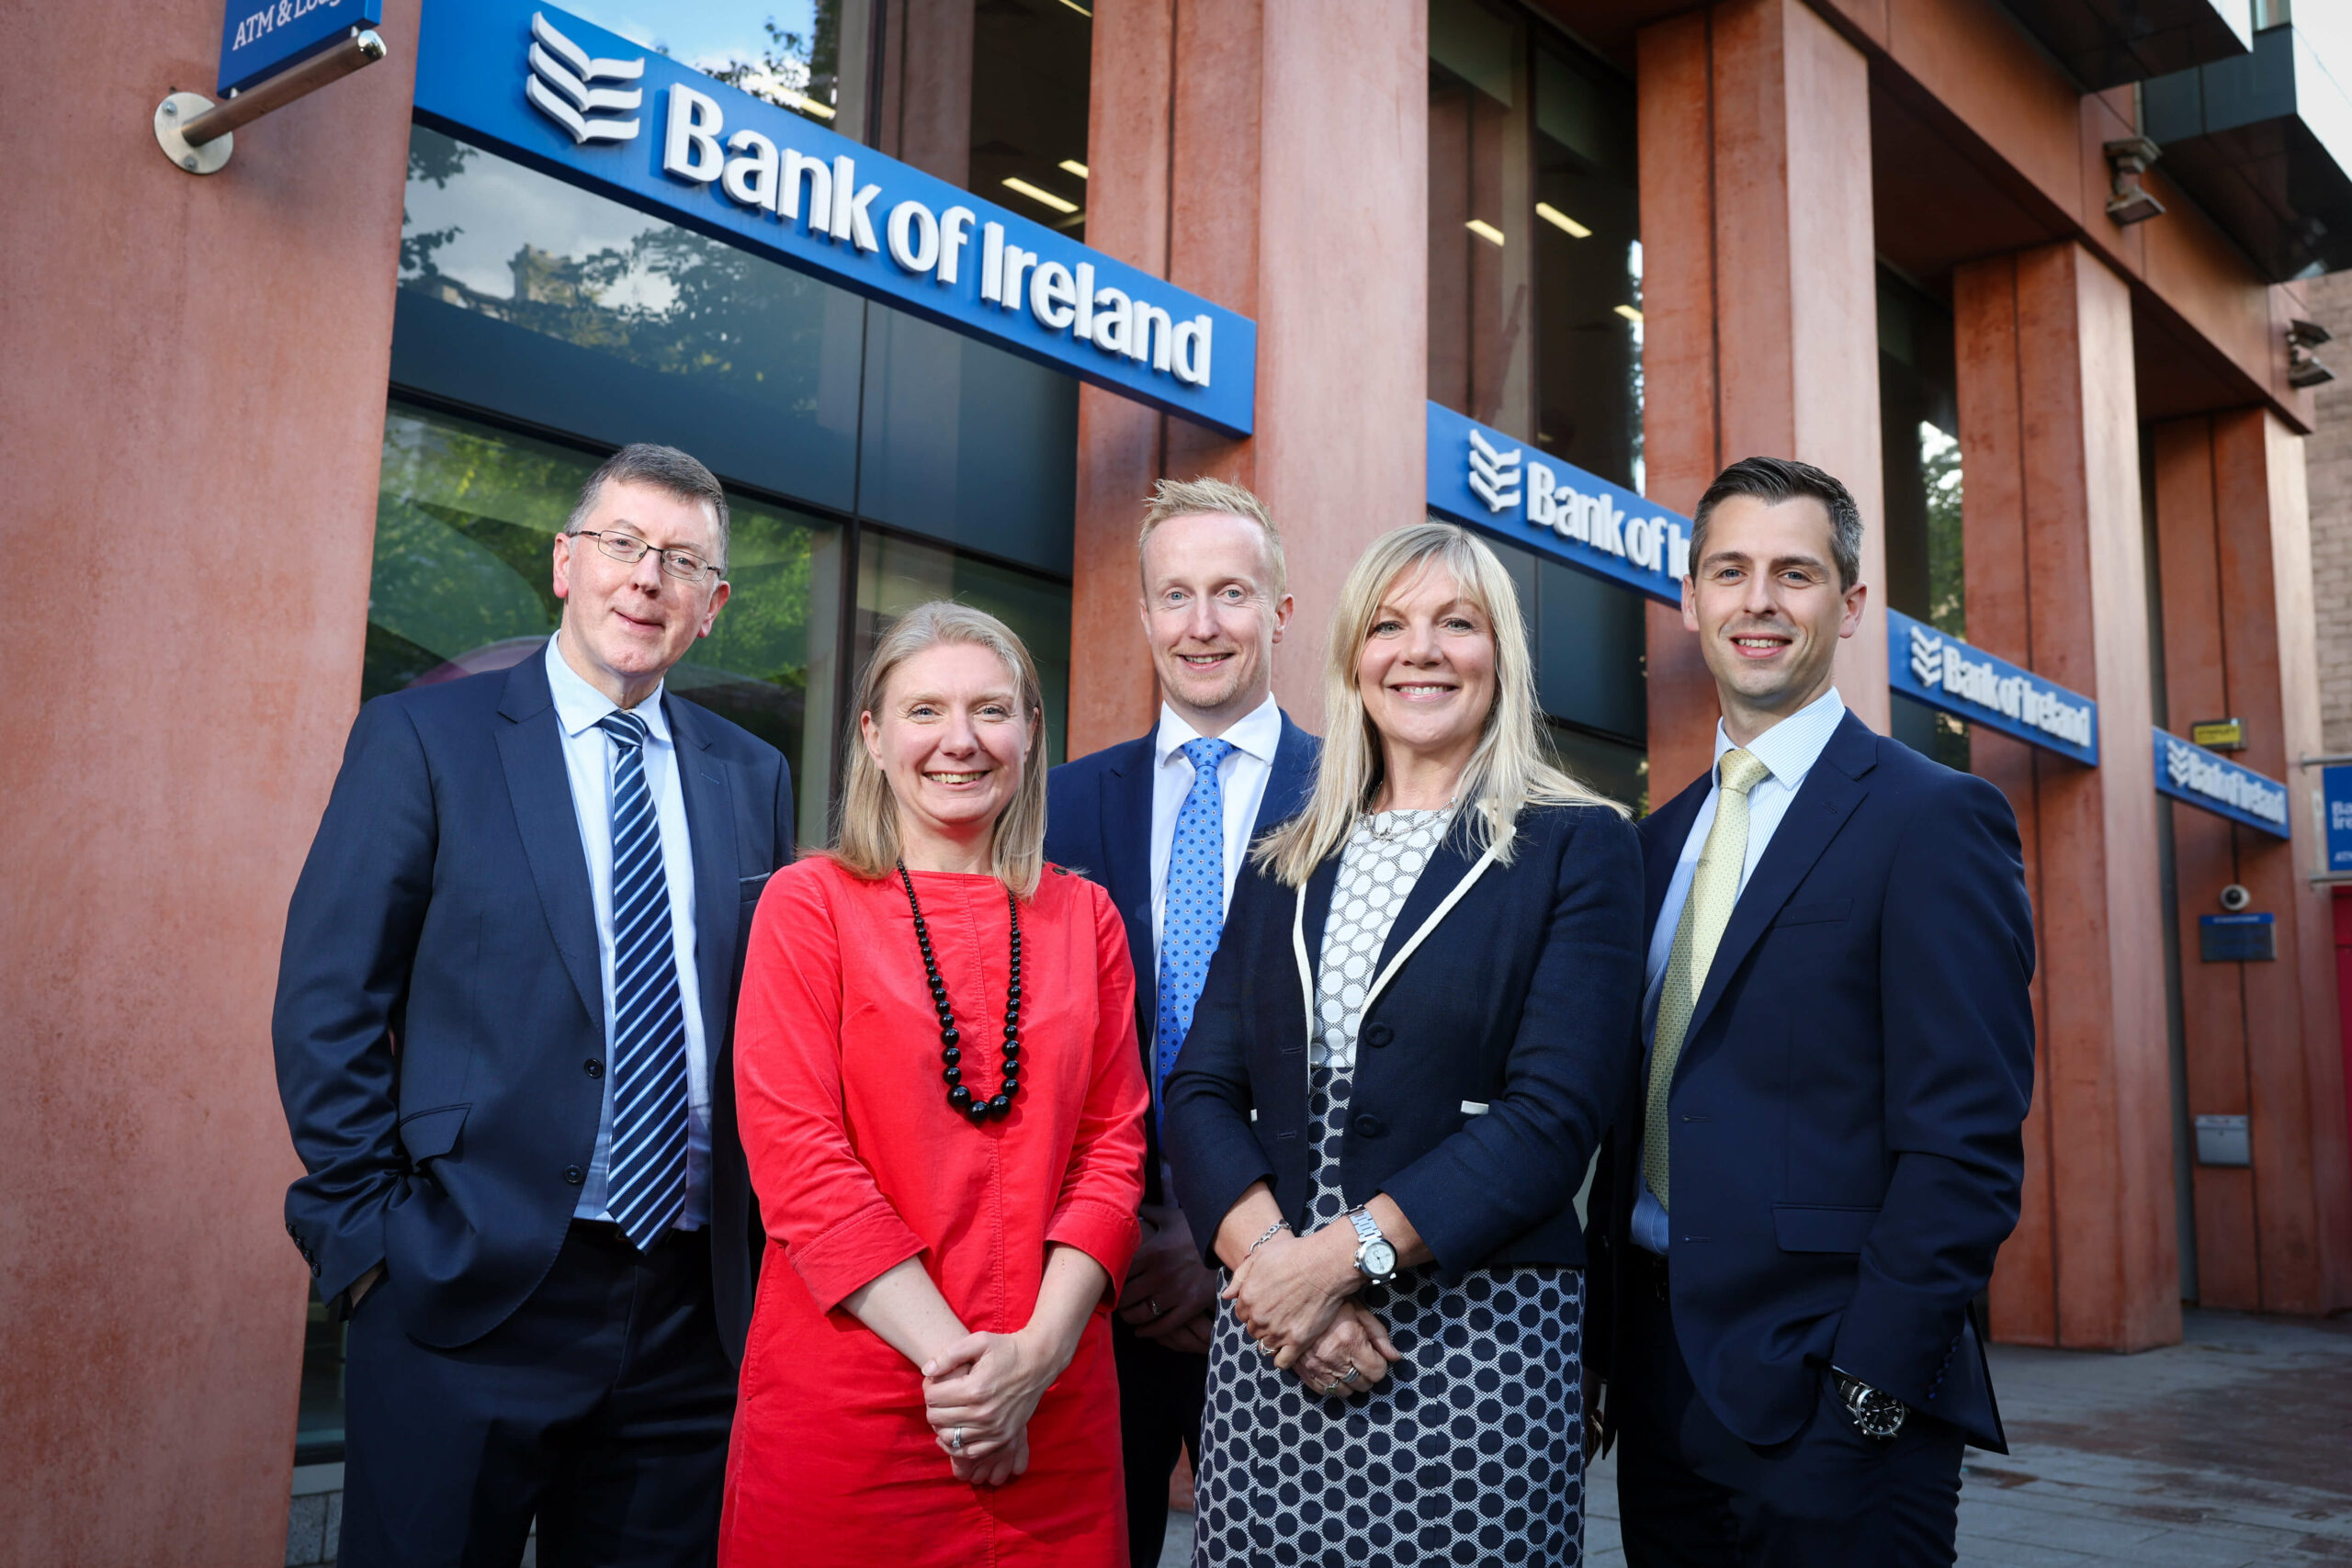 from left Sarah-Jayne Hunniford (Mount Charles), Alan Bridle (Bank of Ireland UK), Niall Devlin (Bank of Ireland UK), Suzanne Wylie (NI Chamber) and David Smith, (Kilwaughter Minerals)